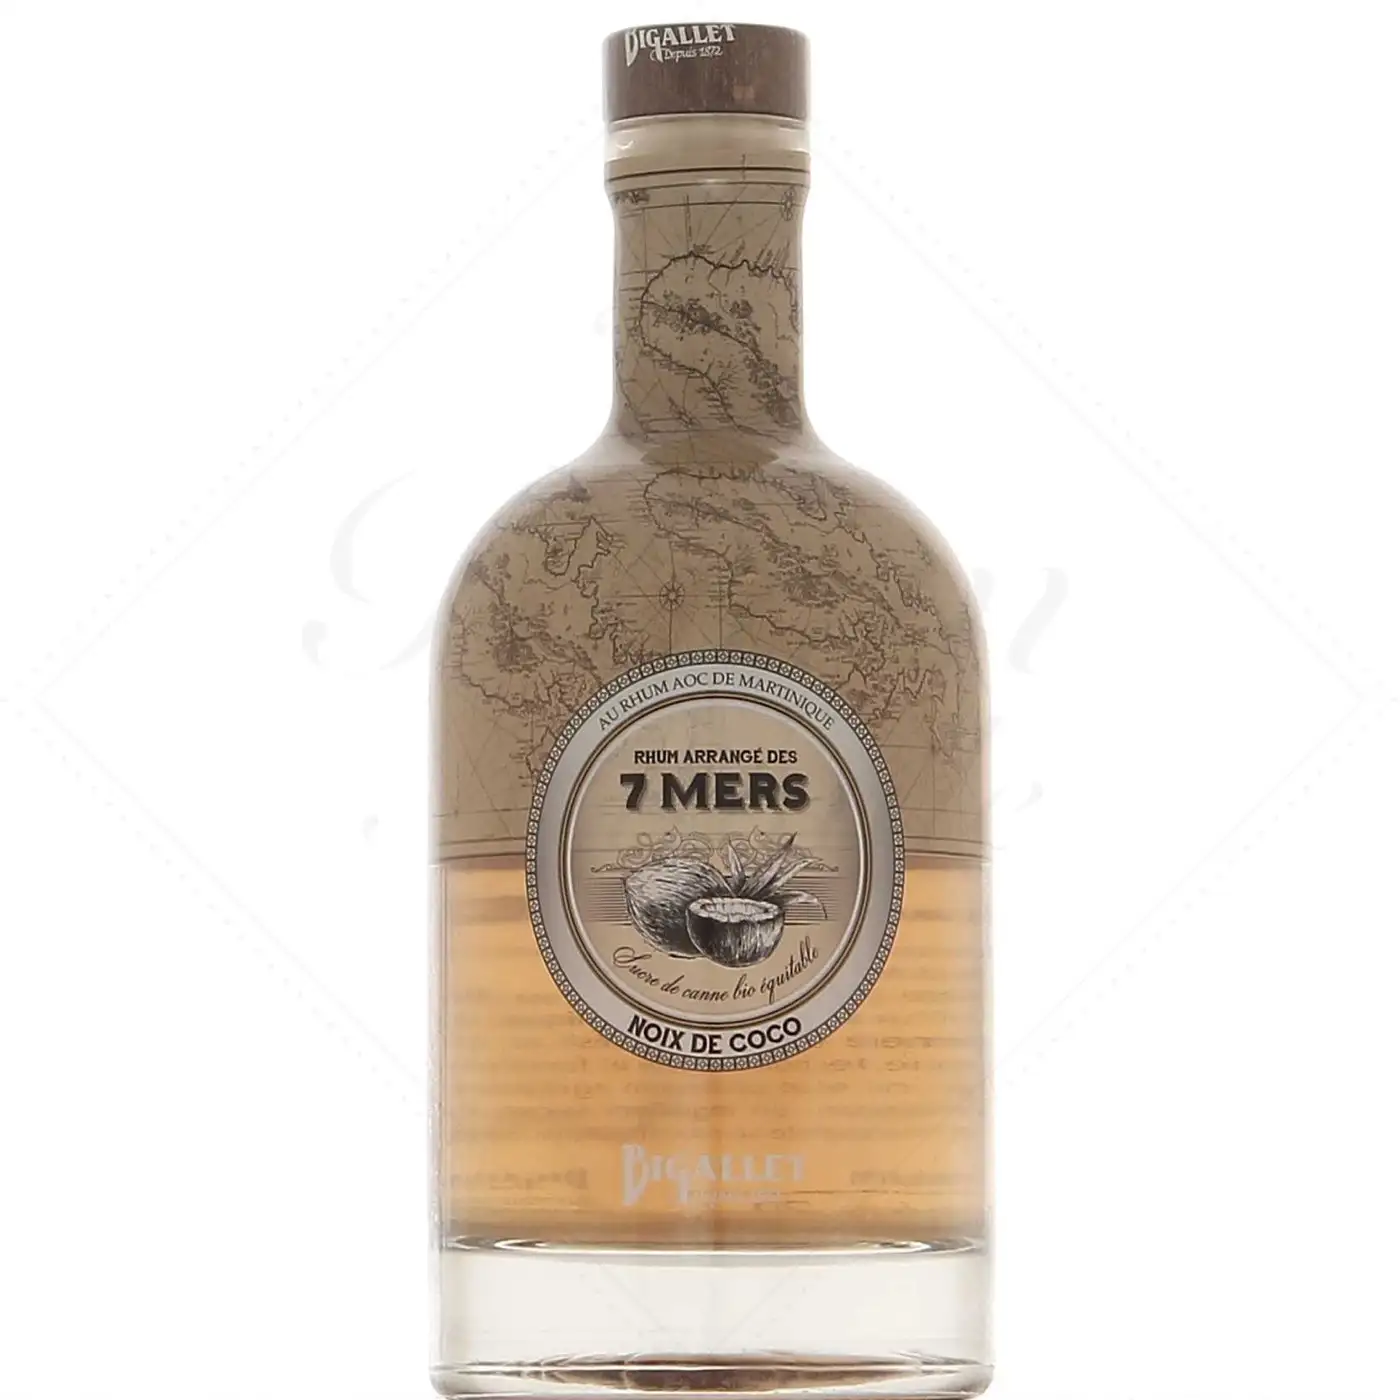 Image of the front of the bottle of the rum Bigallet Rhum arrangé des 7 mers Coco